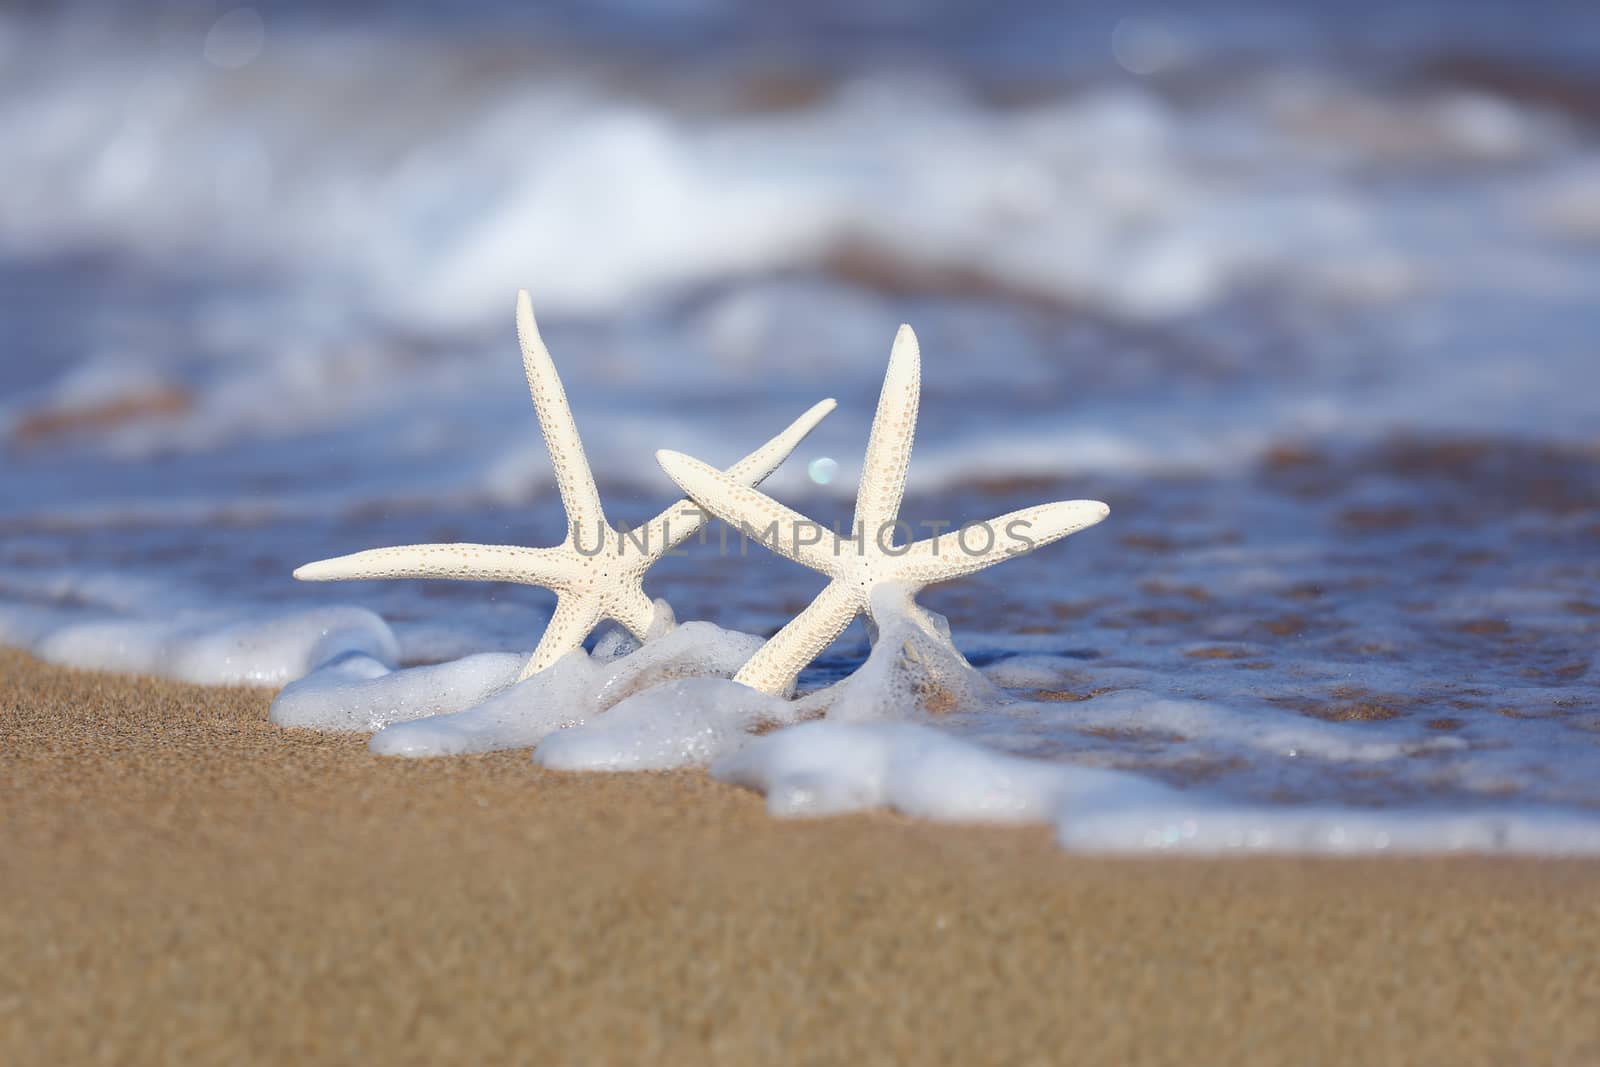 Starfish in the Sand With Seafoam Waves by tobkatrina